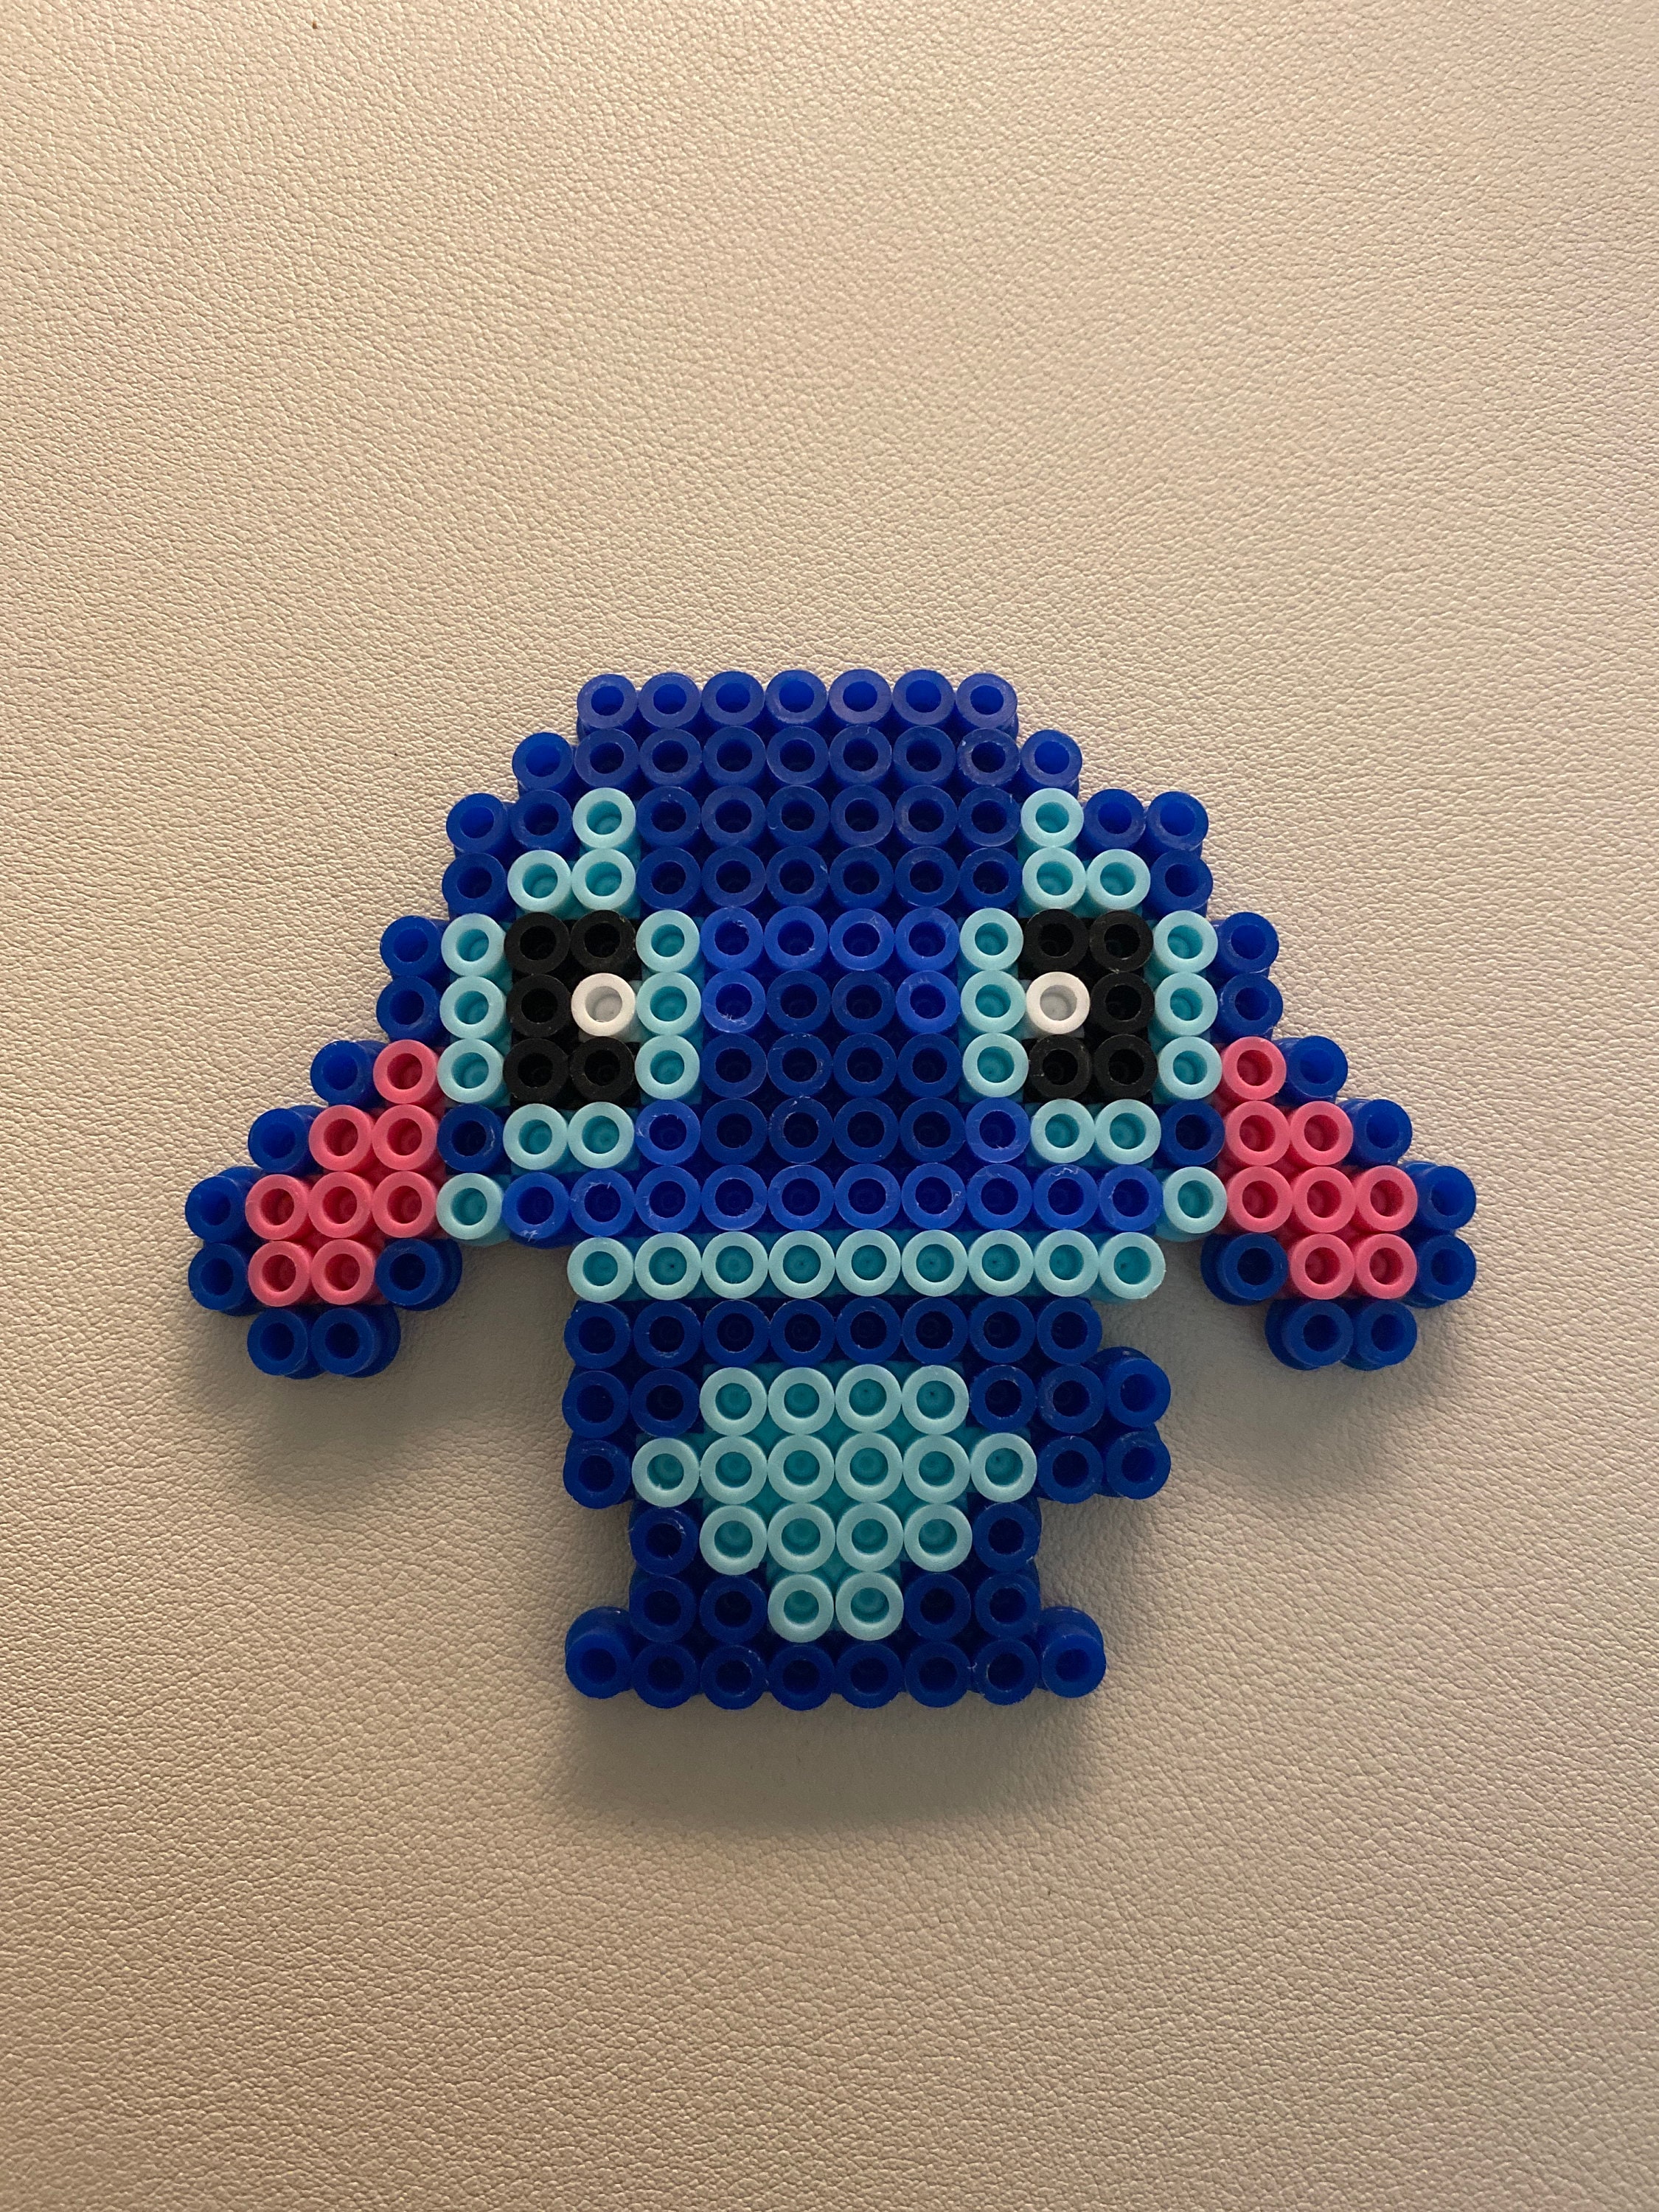 I know it's silly, but I tried melty-beads with the kids and I like this  alot